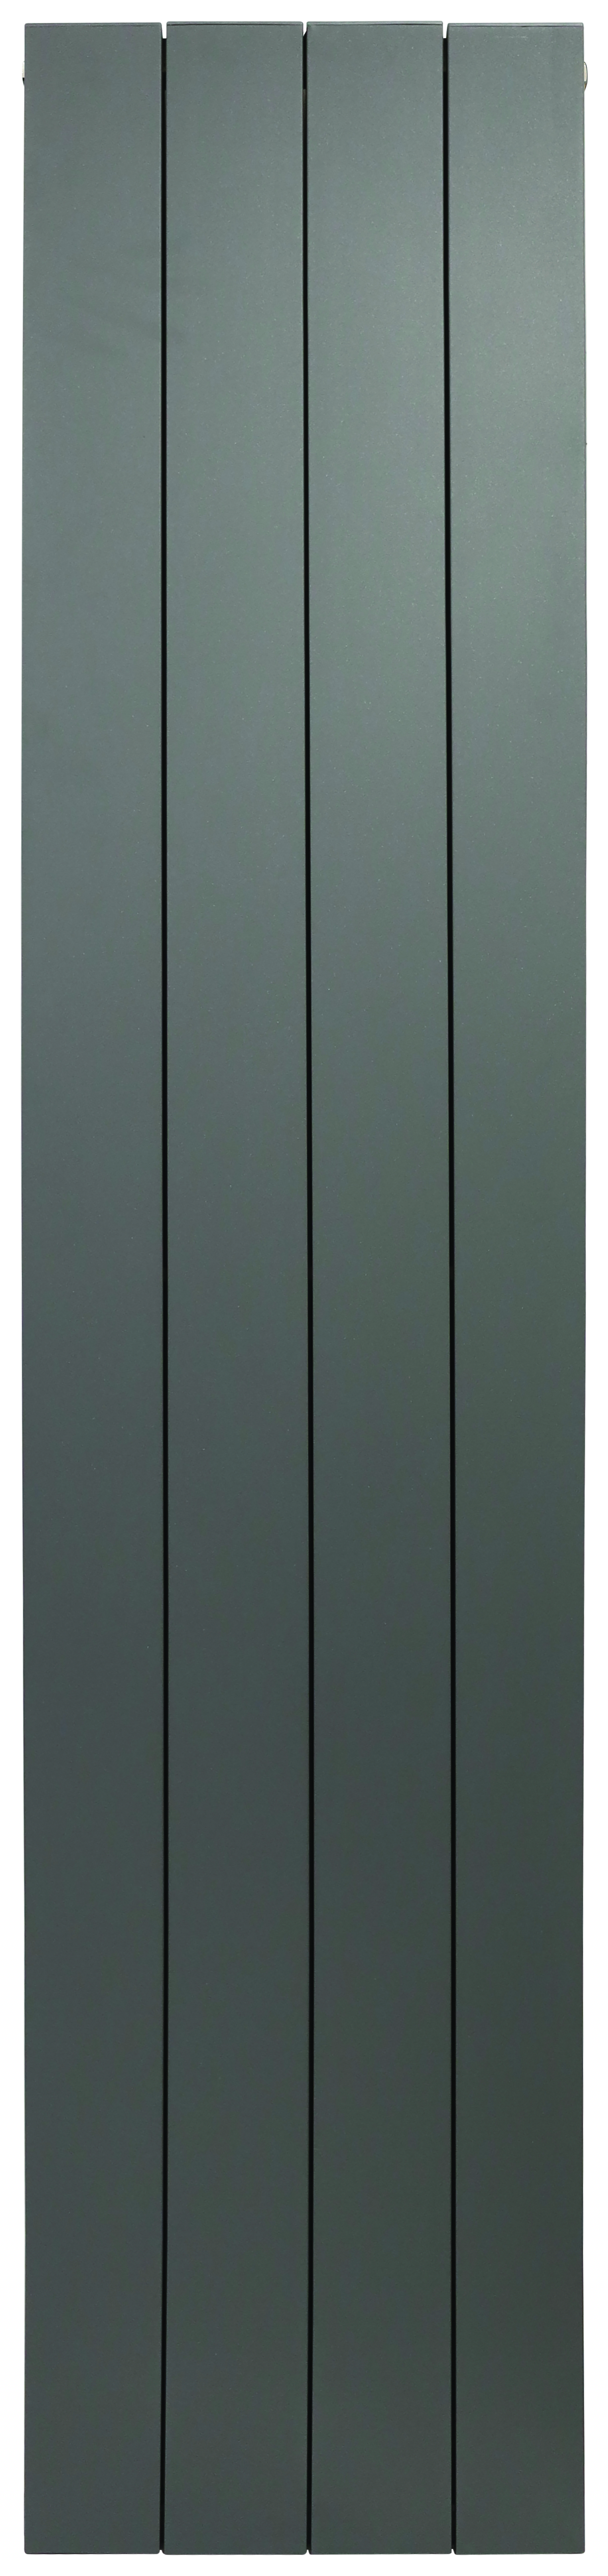 Image of Towelrads Anthracite Grey Ascot Double Vertical Designer Radiator - 1800 x 612mm